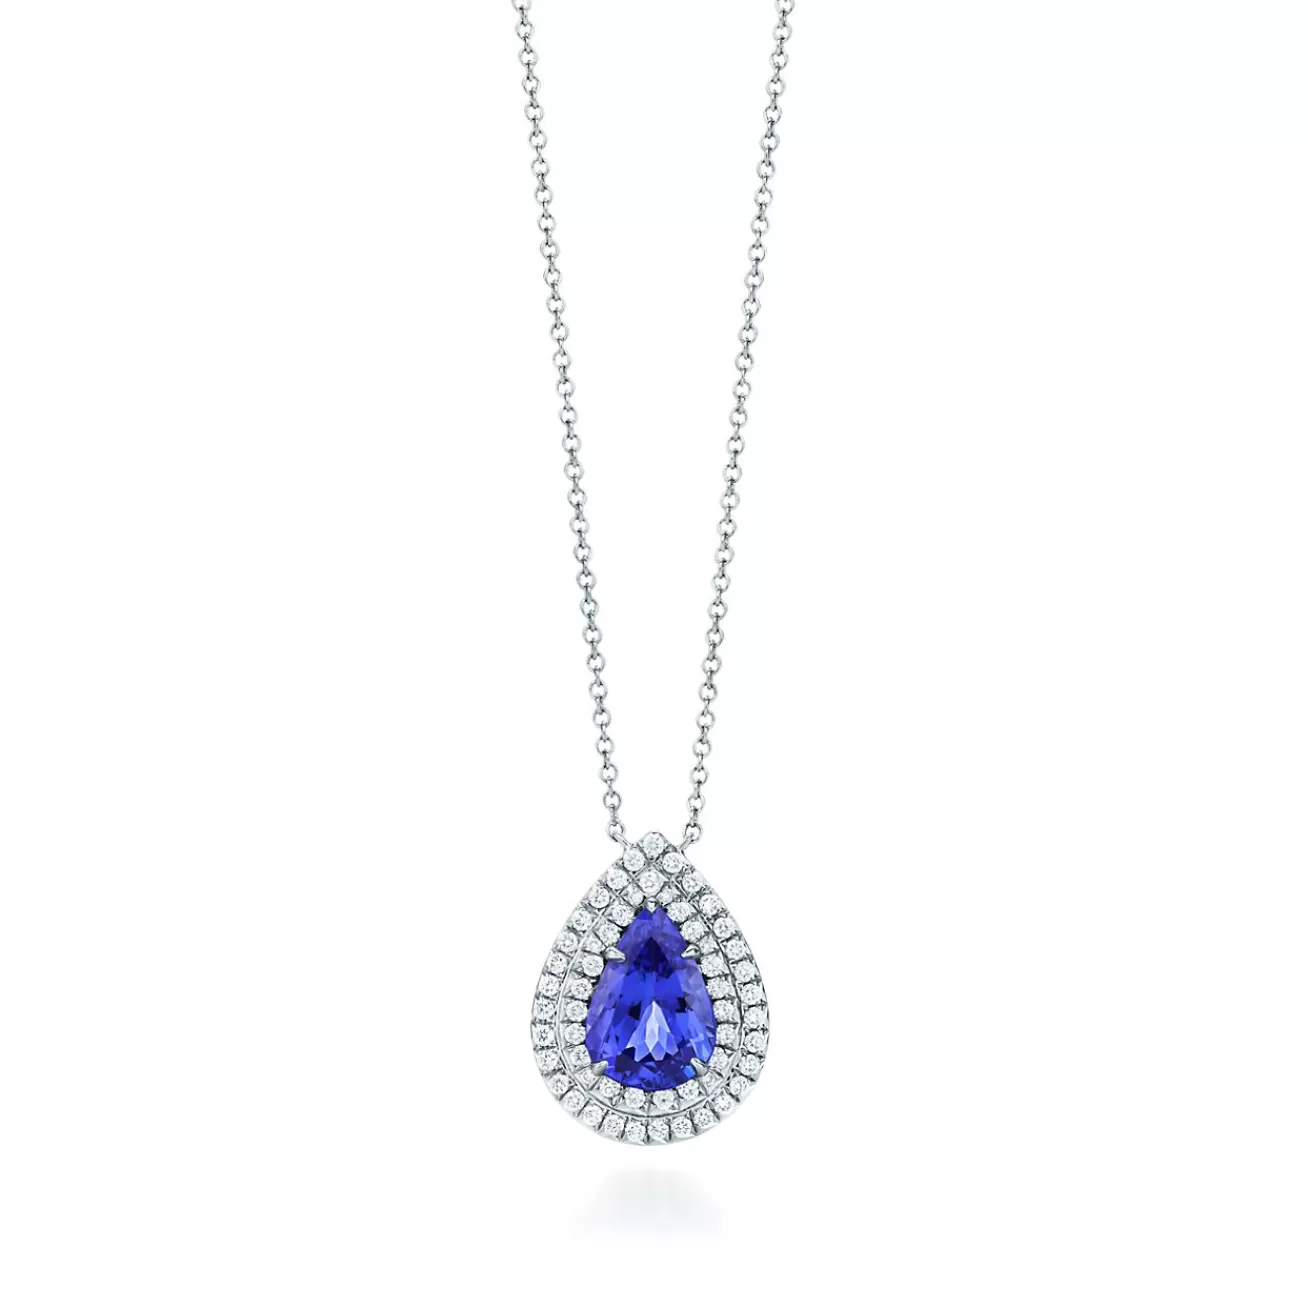 Tiffany & Co. Tiffany Soleste Pendant in platinum with a pear-shaped tanzanite. | ^ Necklaces & Pendants | Platinum Jewelry